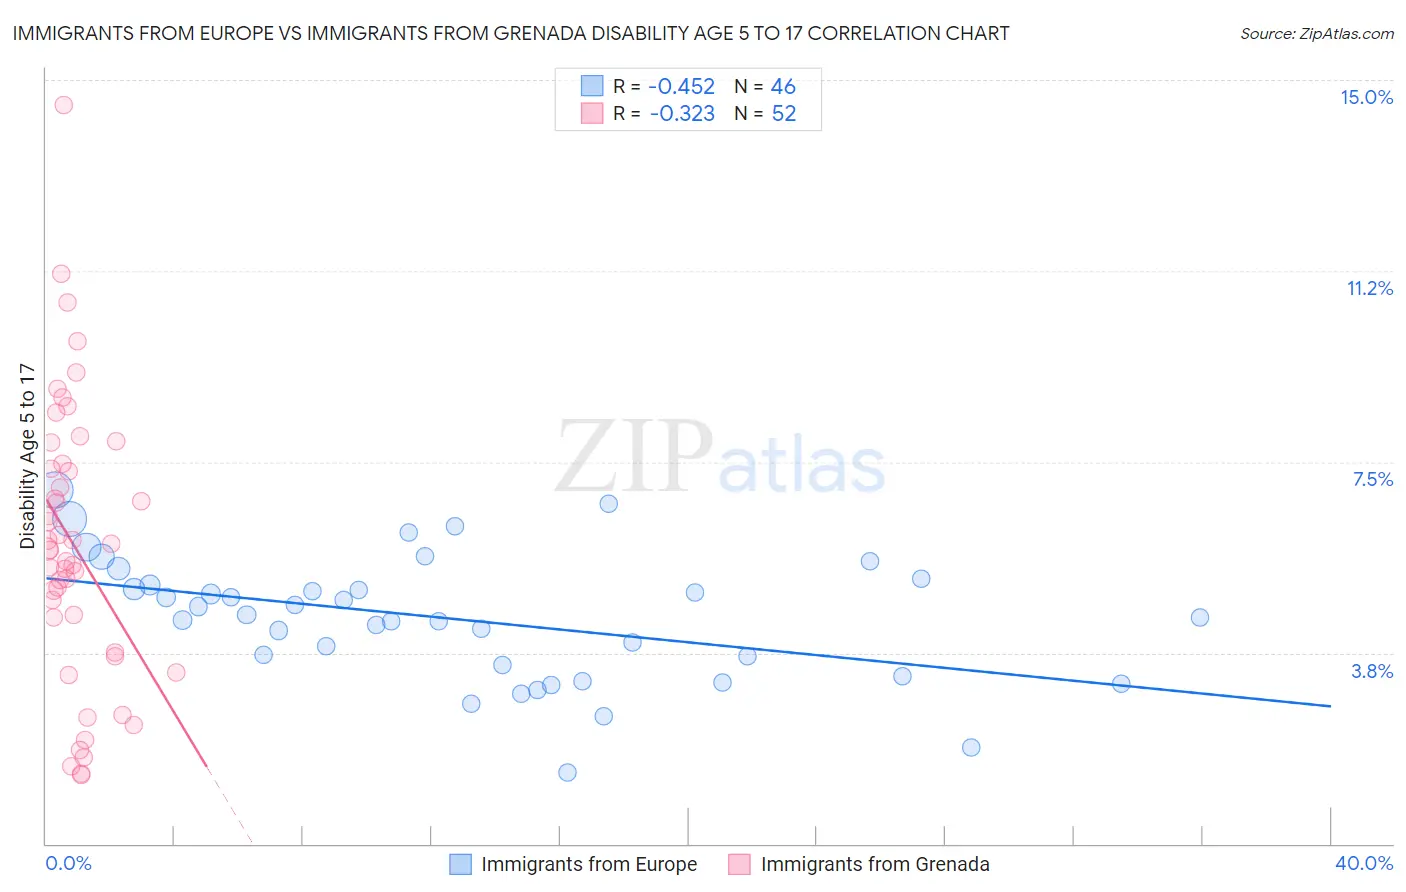 Immigrants from Europe vs Immigrants from Grenada Disability Age 5 to 17